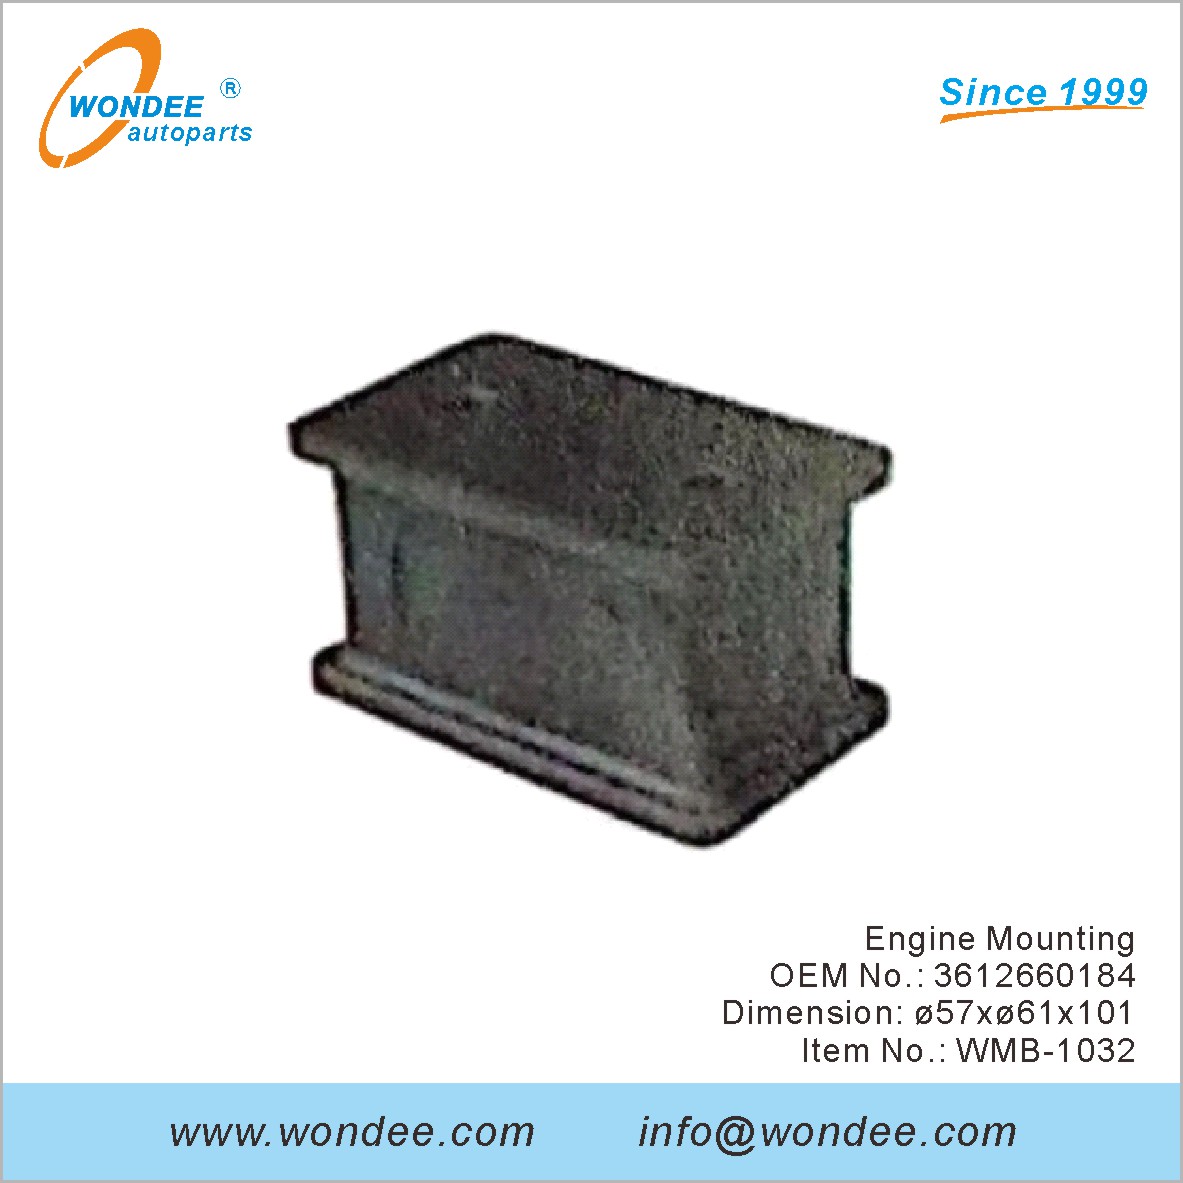 Engine Mounting OEM 3612660184 for Benz from WONDEE